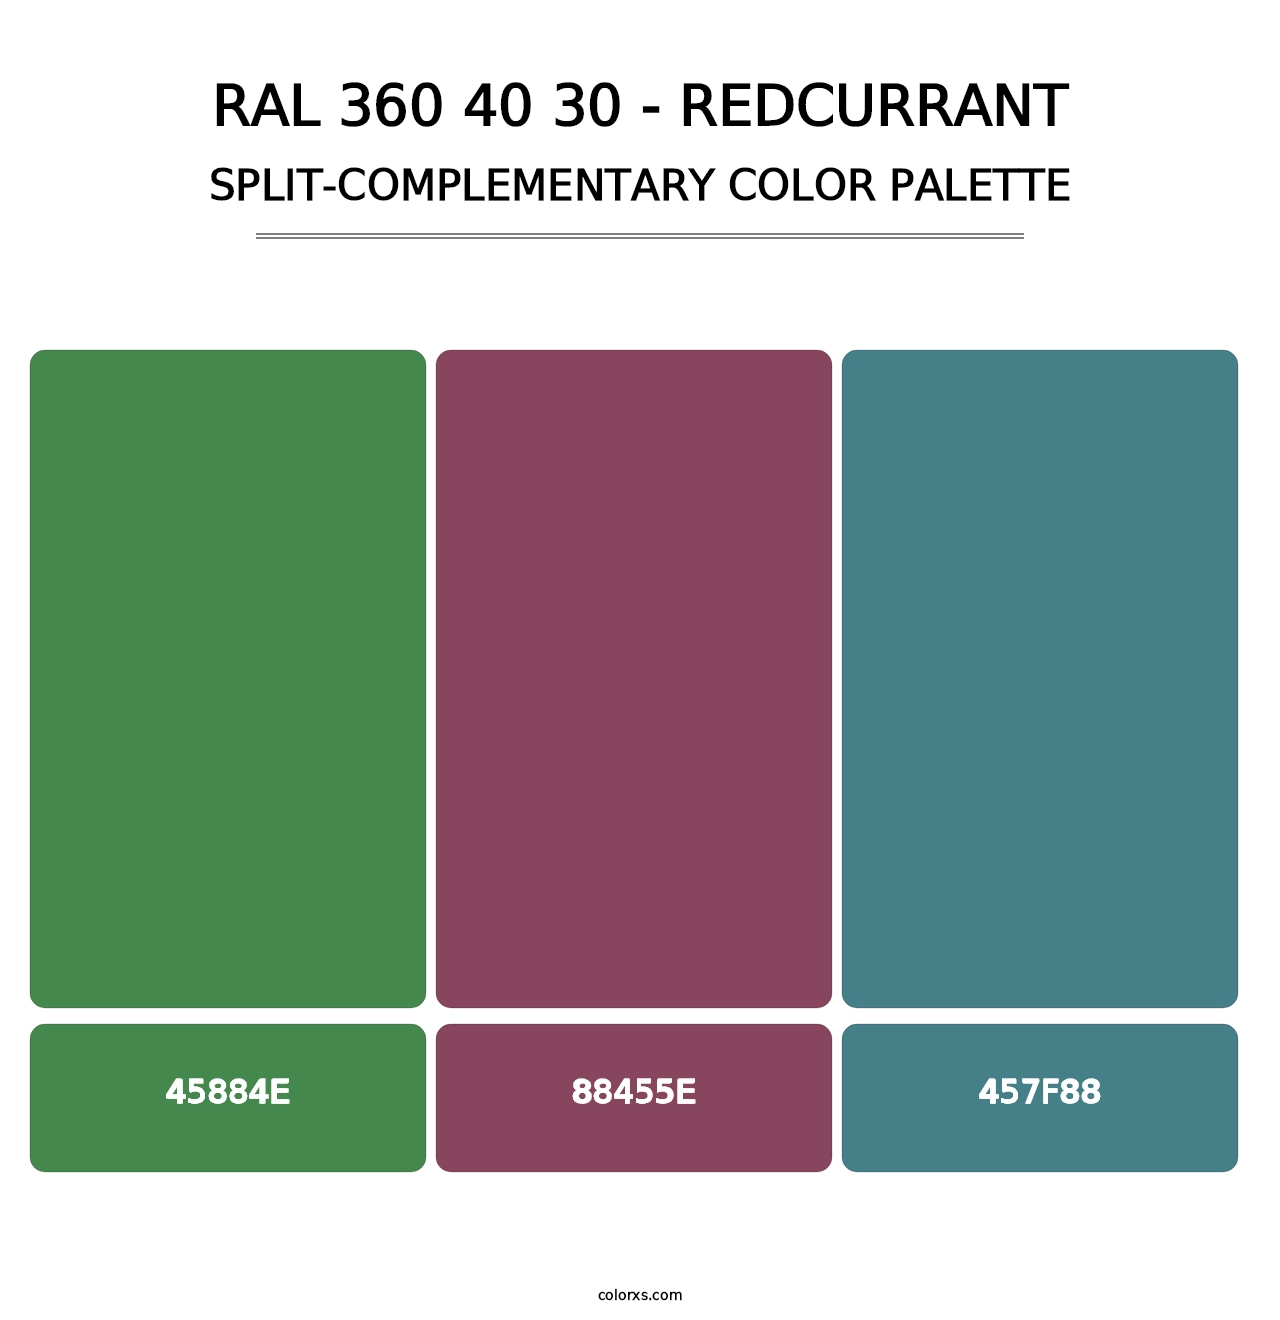 RAL 360 40 30 - Redcurrant - Split-Complementary Color Palette